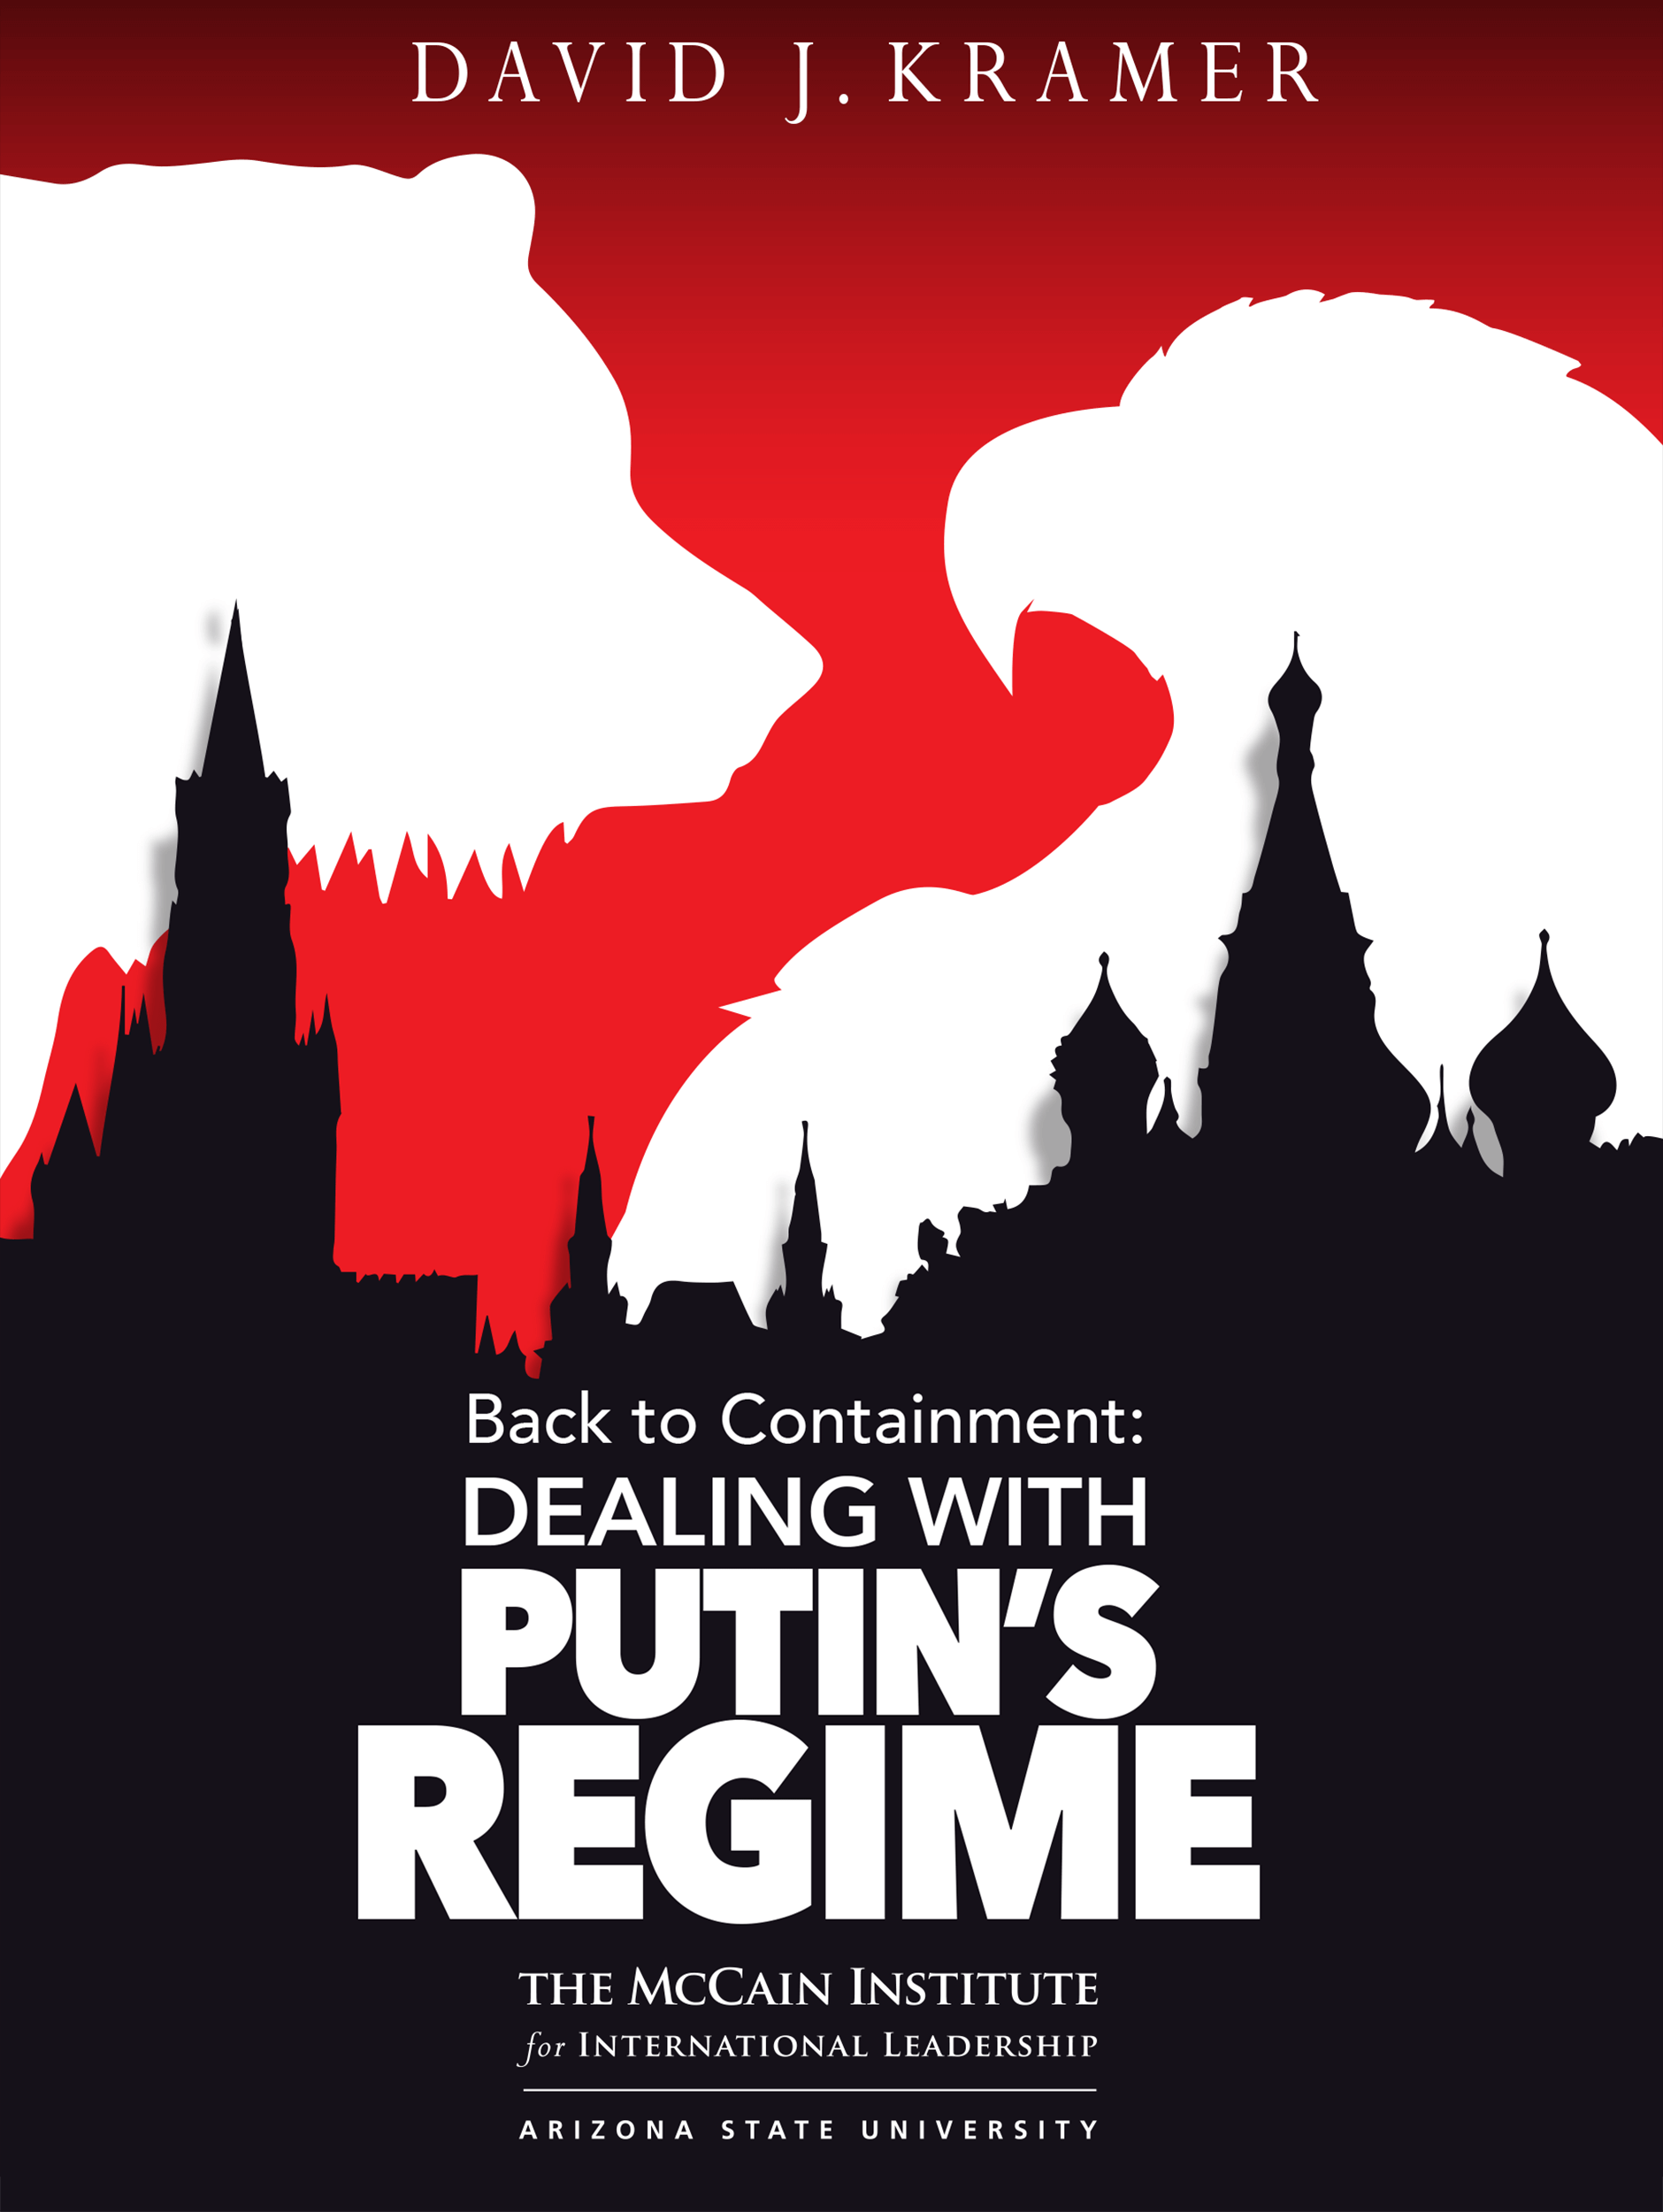 Kramer's book, Back to Containment: Dealing with Putin's Regime, was released in August 2017. 